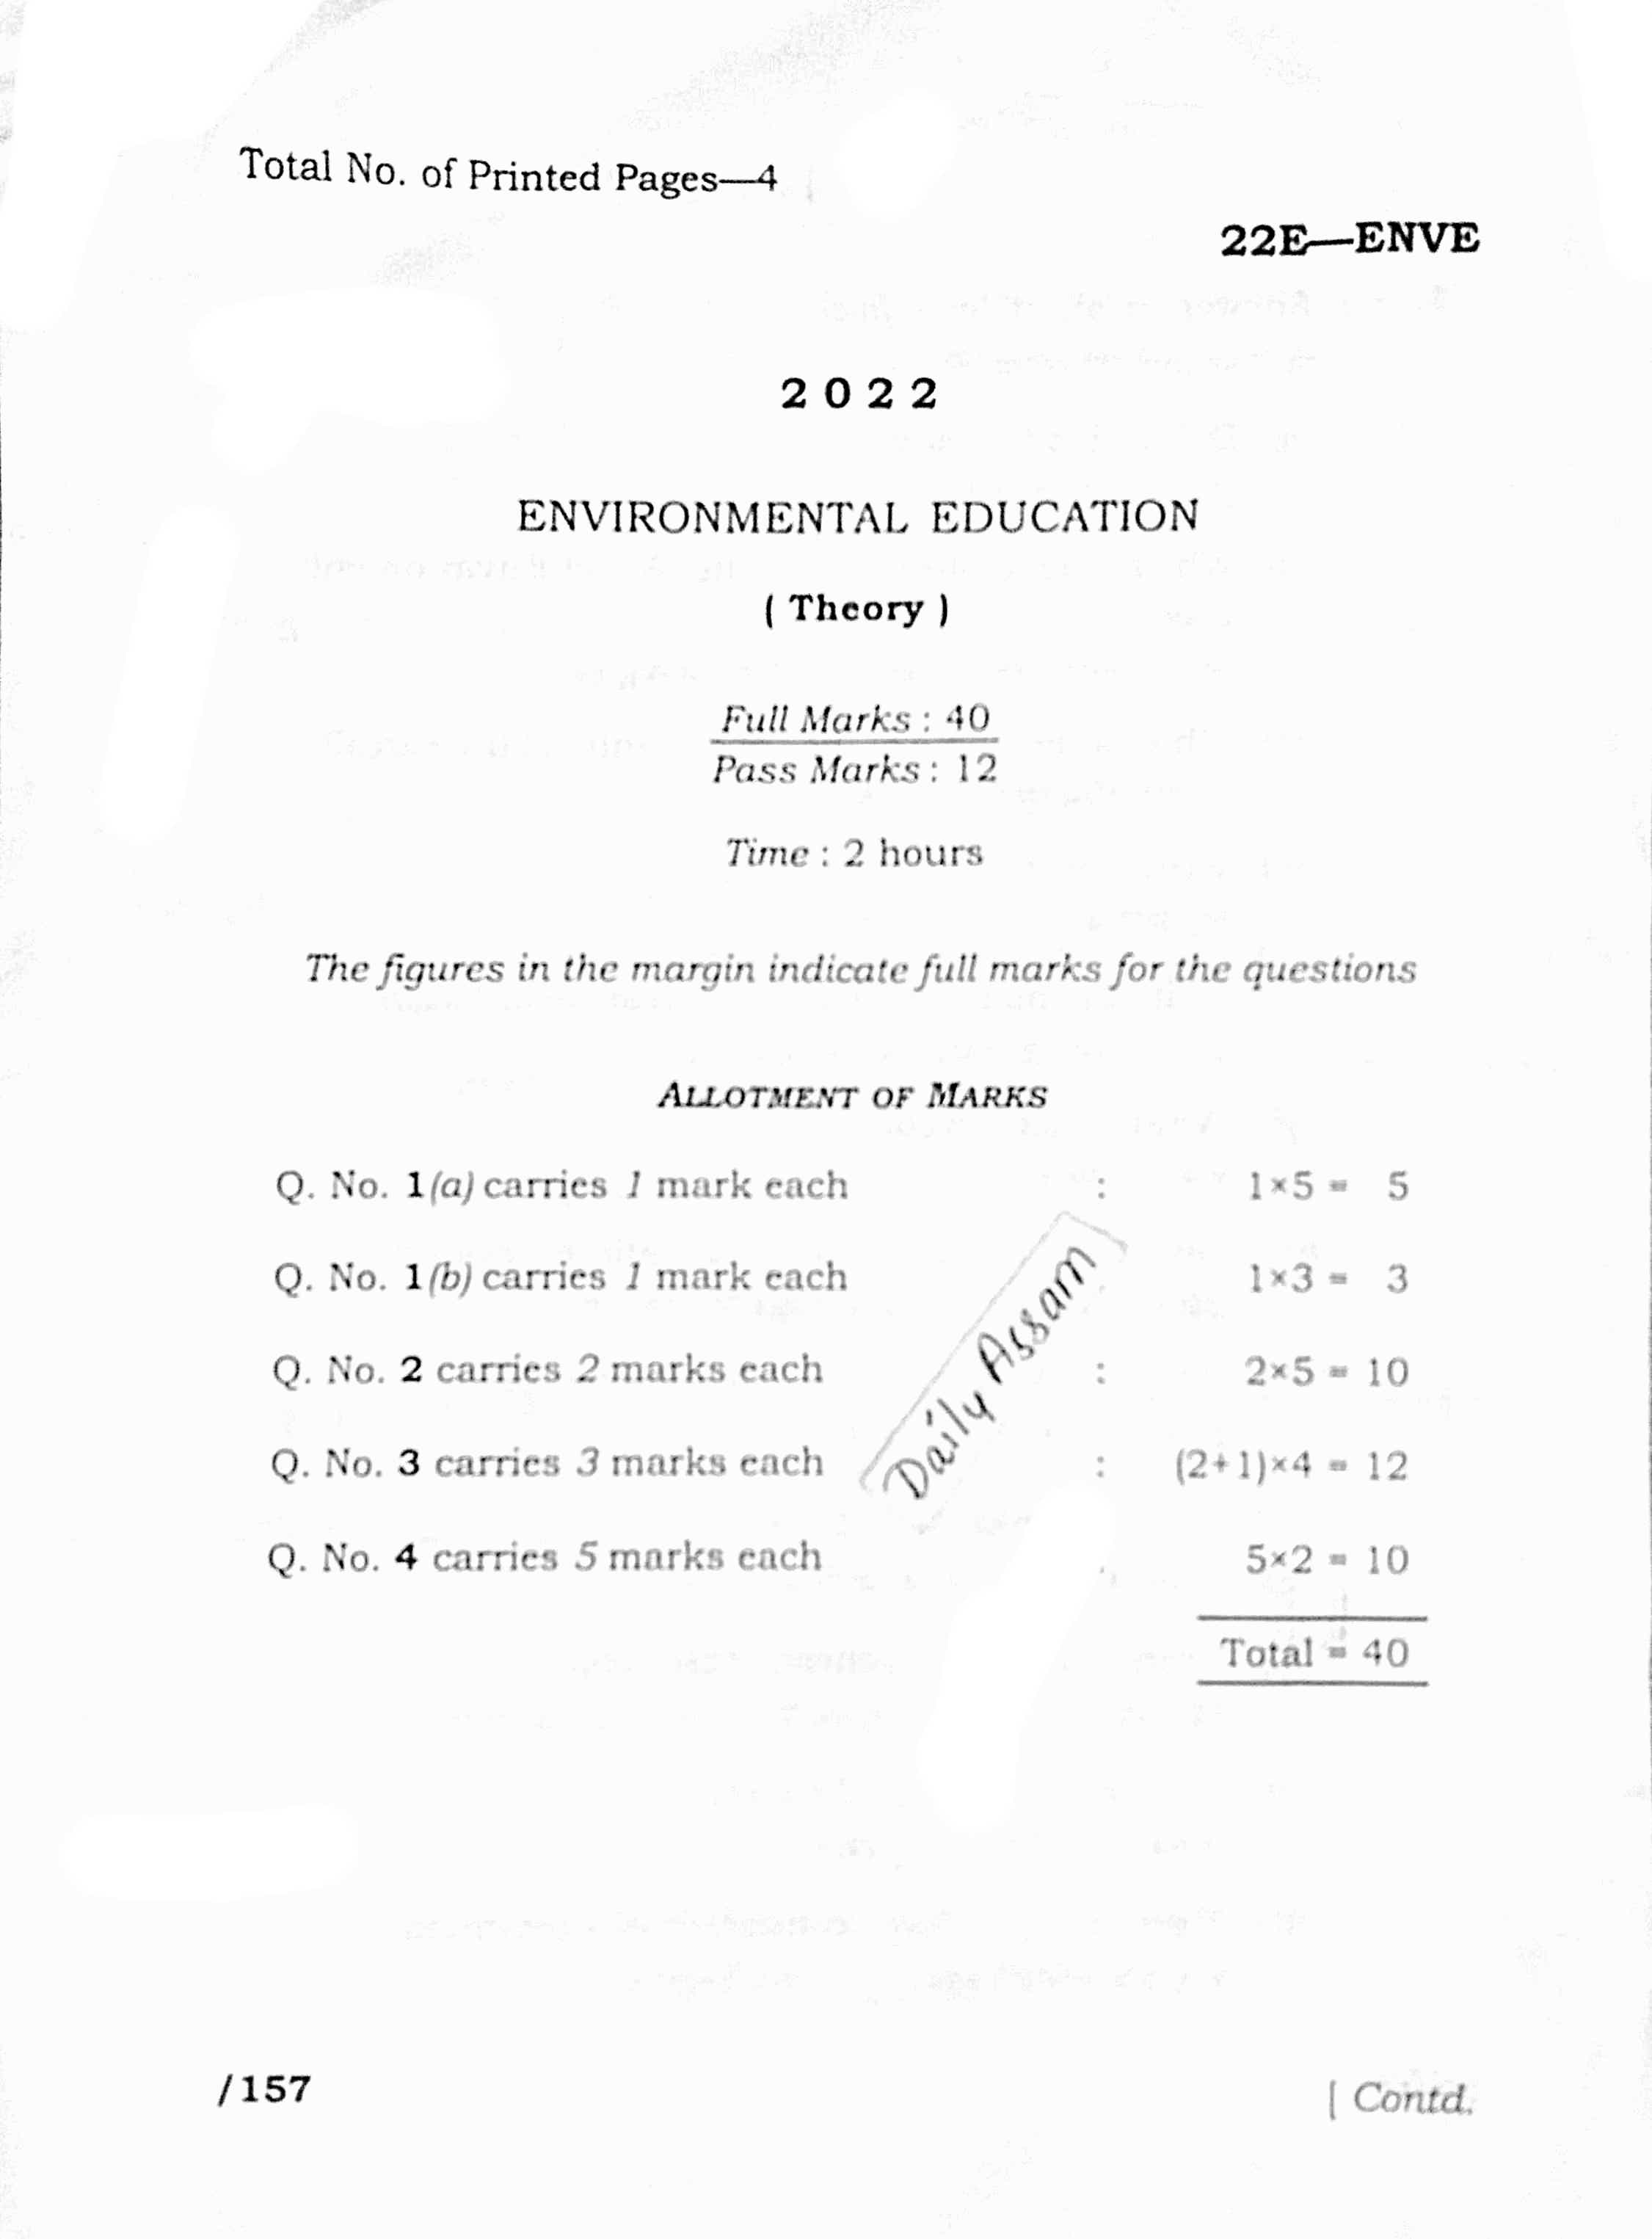 health education and environmental studies question paper